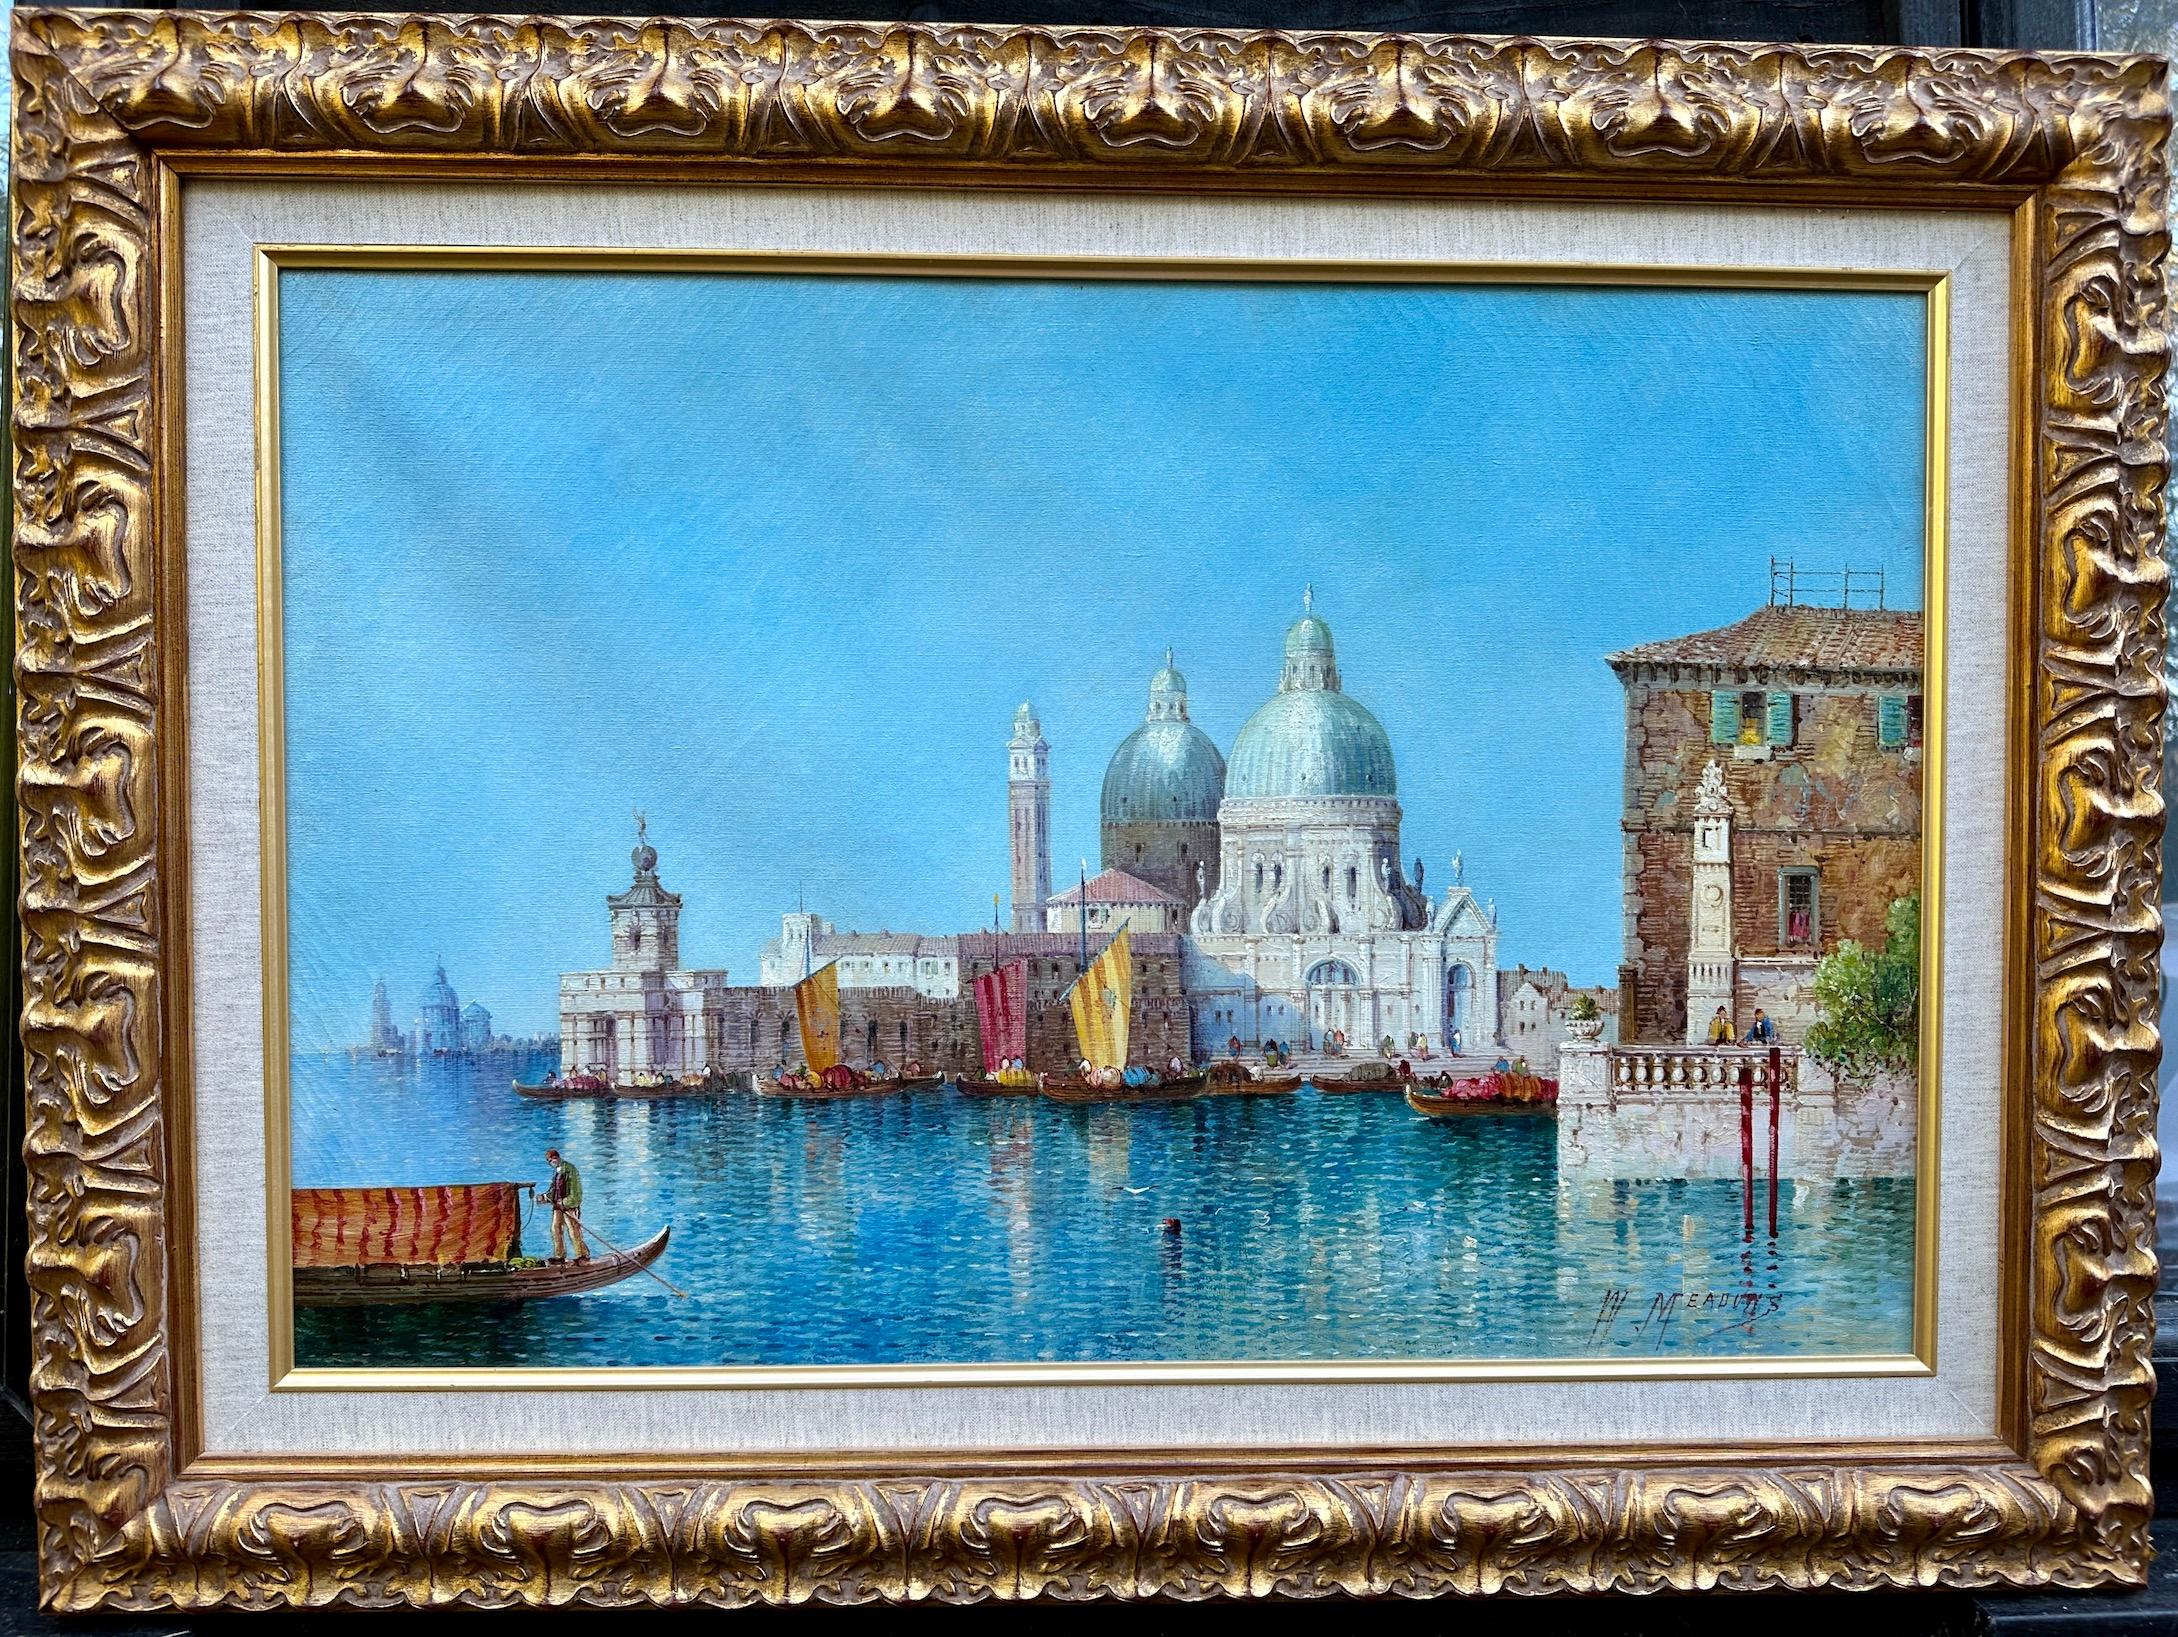 William Meadows Figurative Painting - Antique oil  19th century View of Venice, Santa Maria Della Salute from a canal.